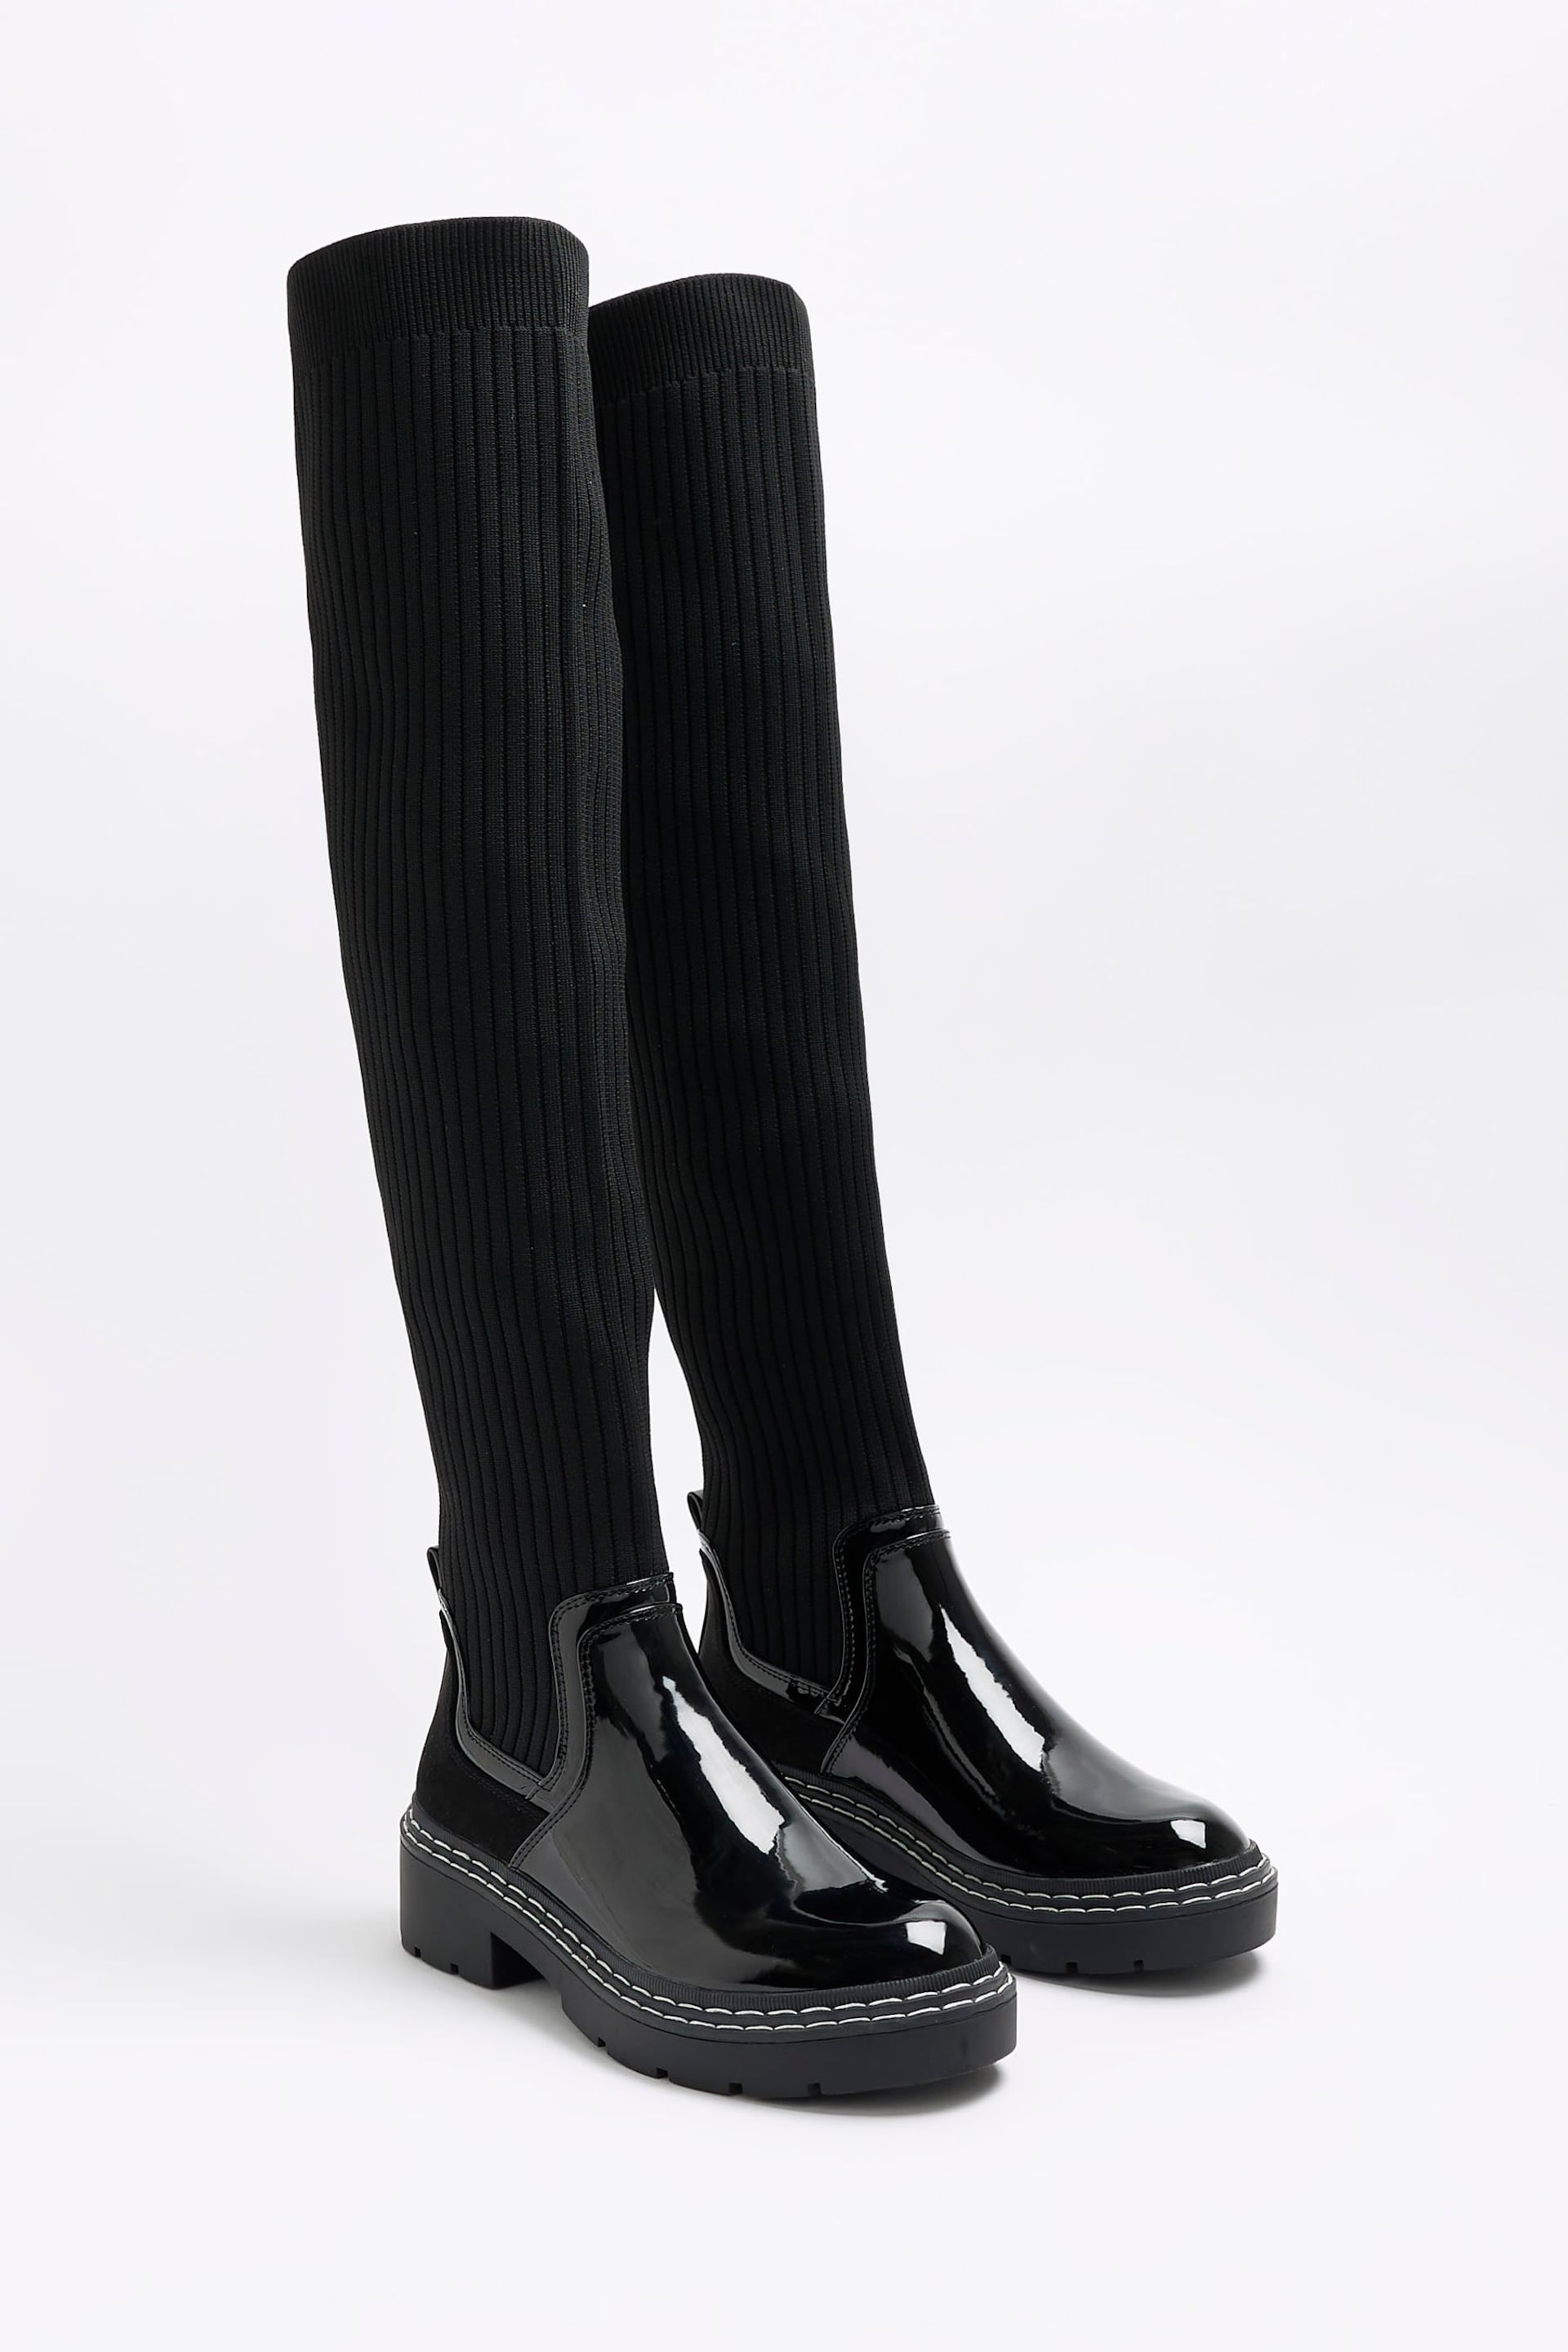 River Island Black Knit High Leg Boots - Image 3 of 5